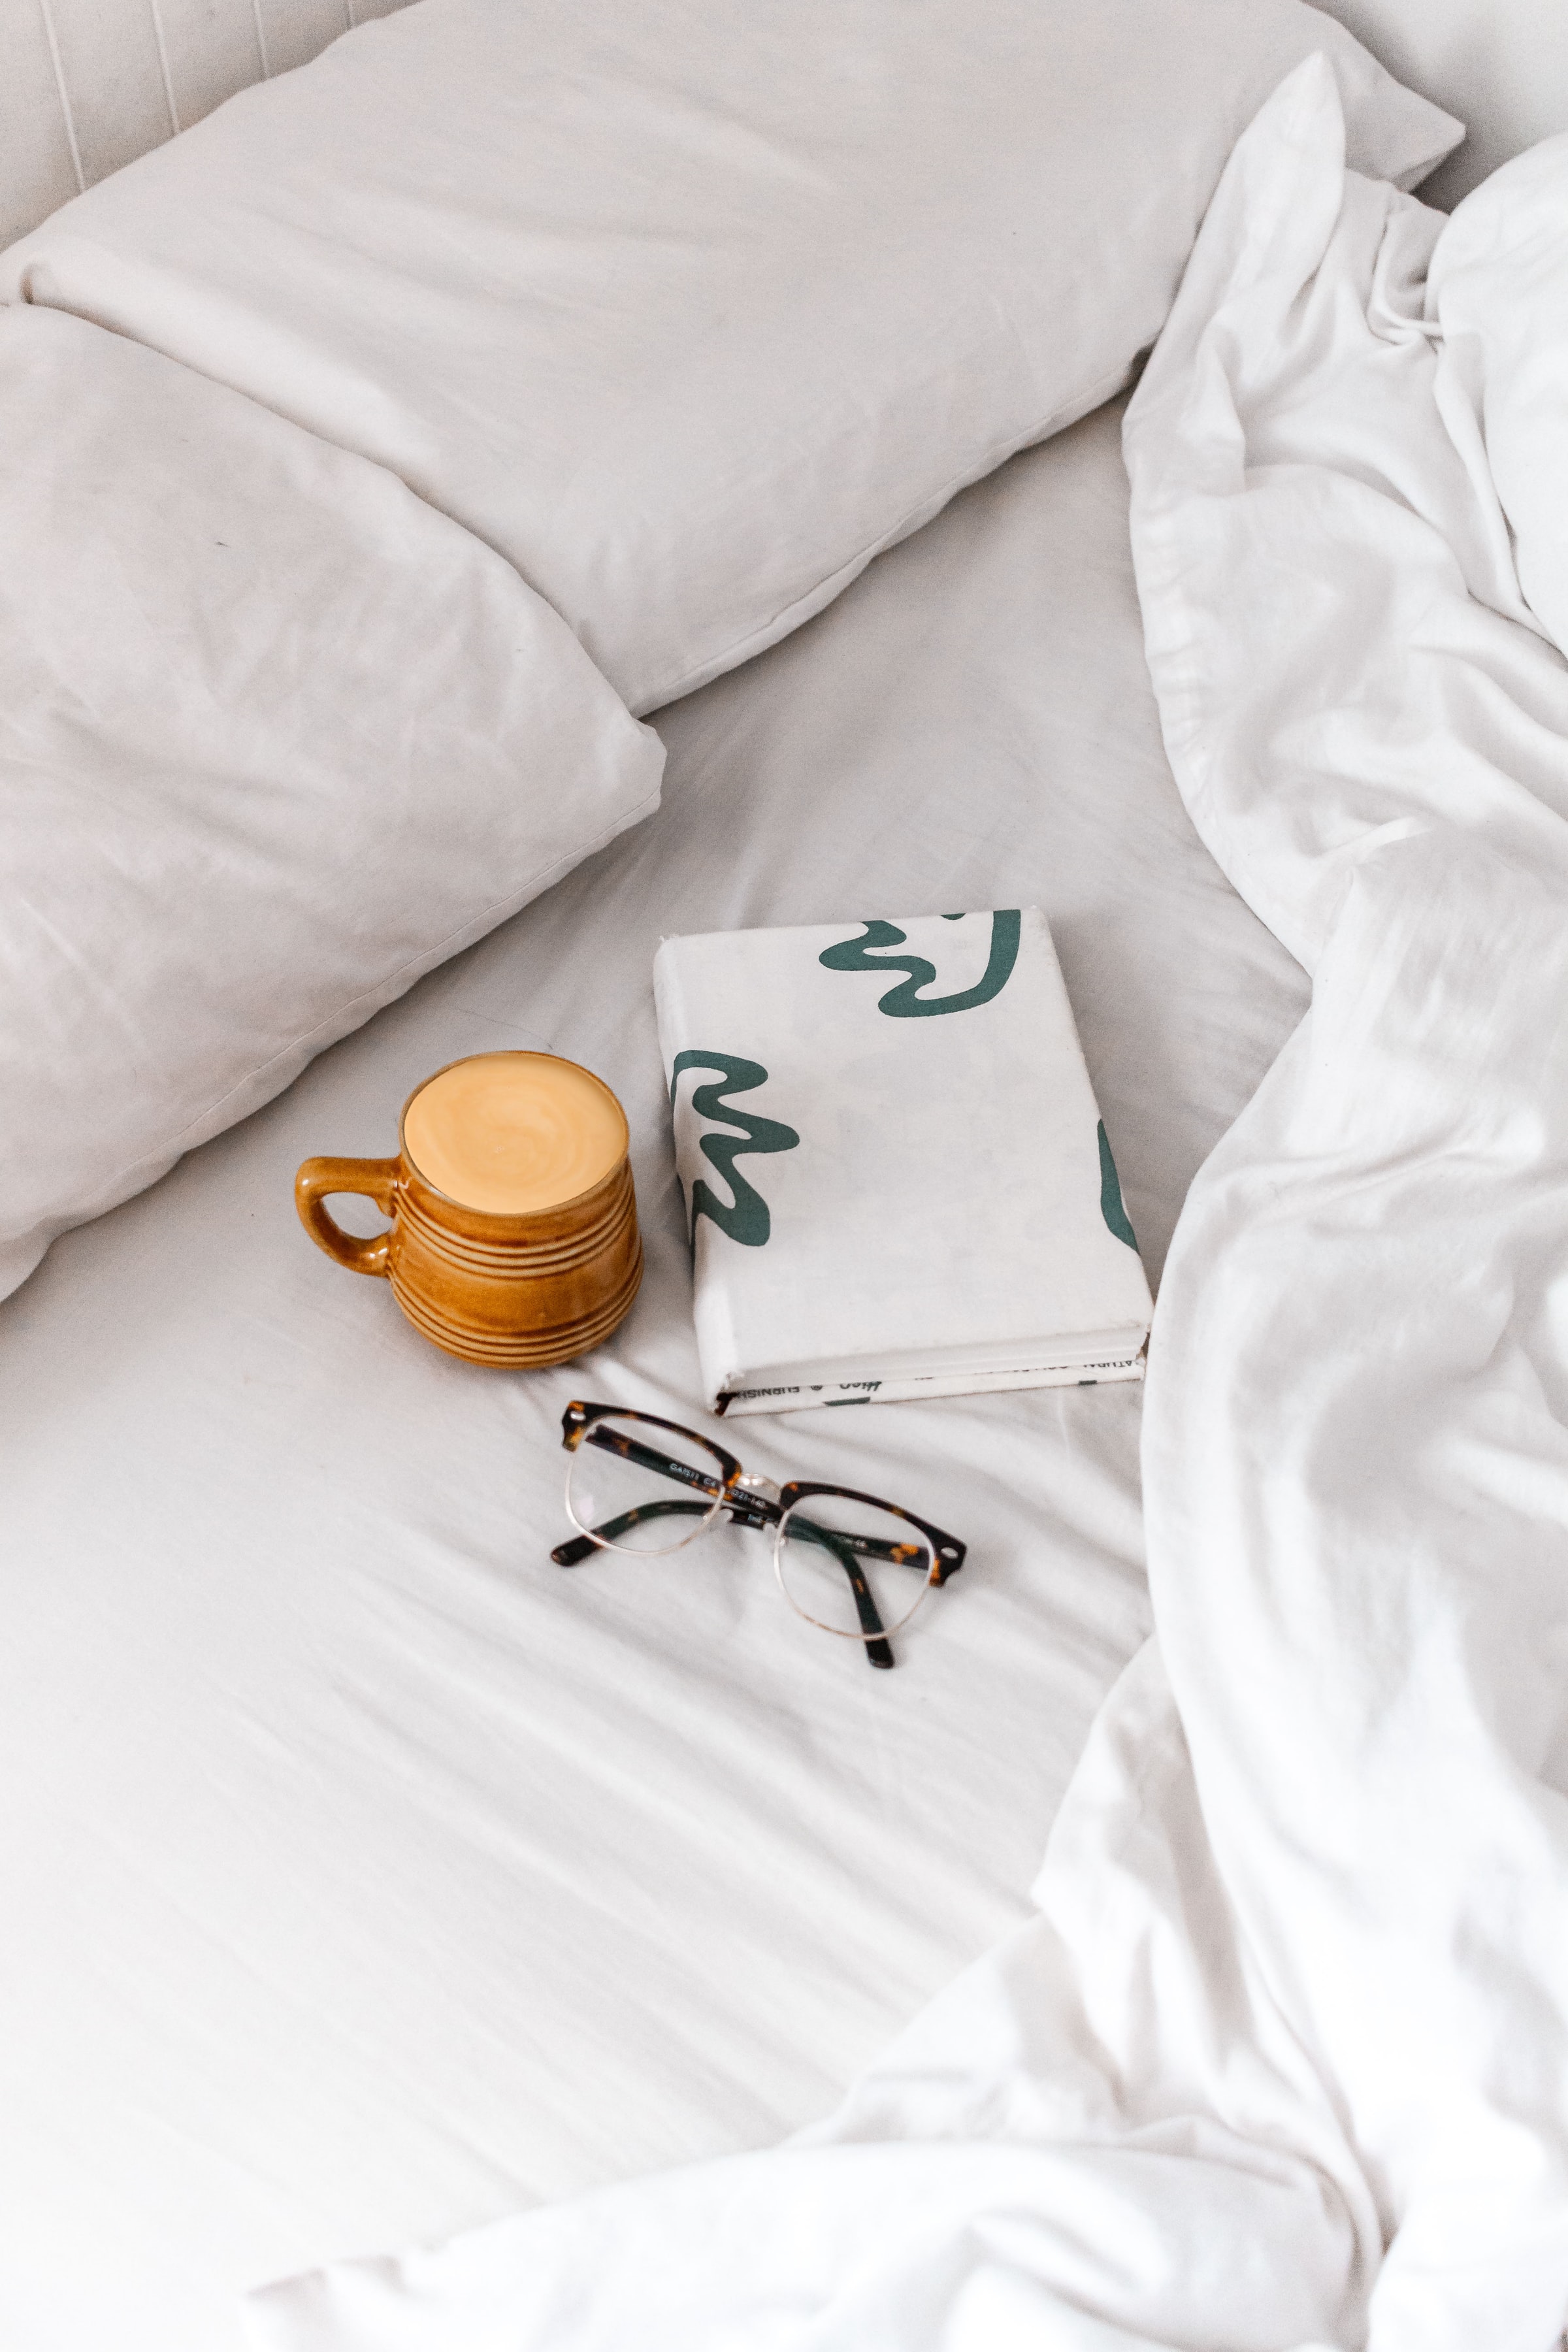 bed, coffee, miscellanea, miscellaneous, cup, book, glasses, spectacles